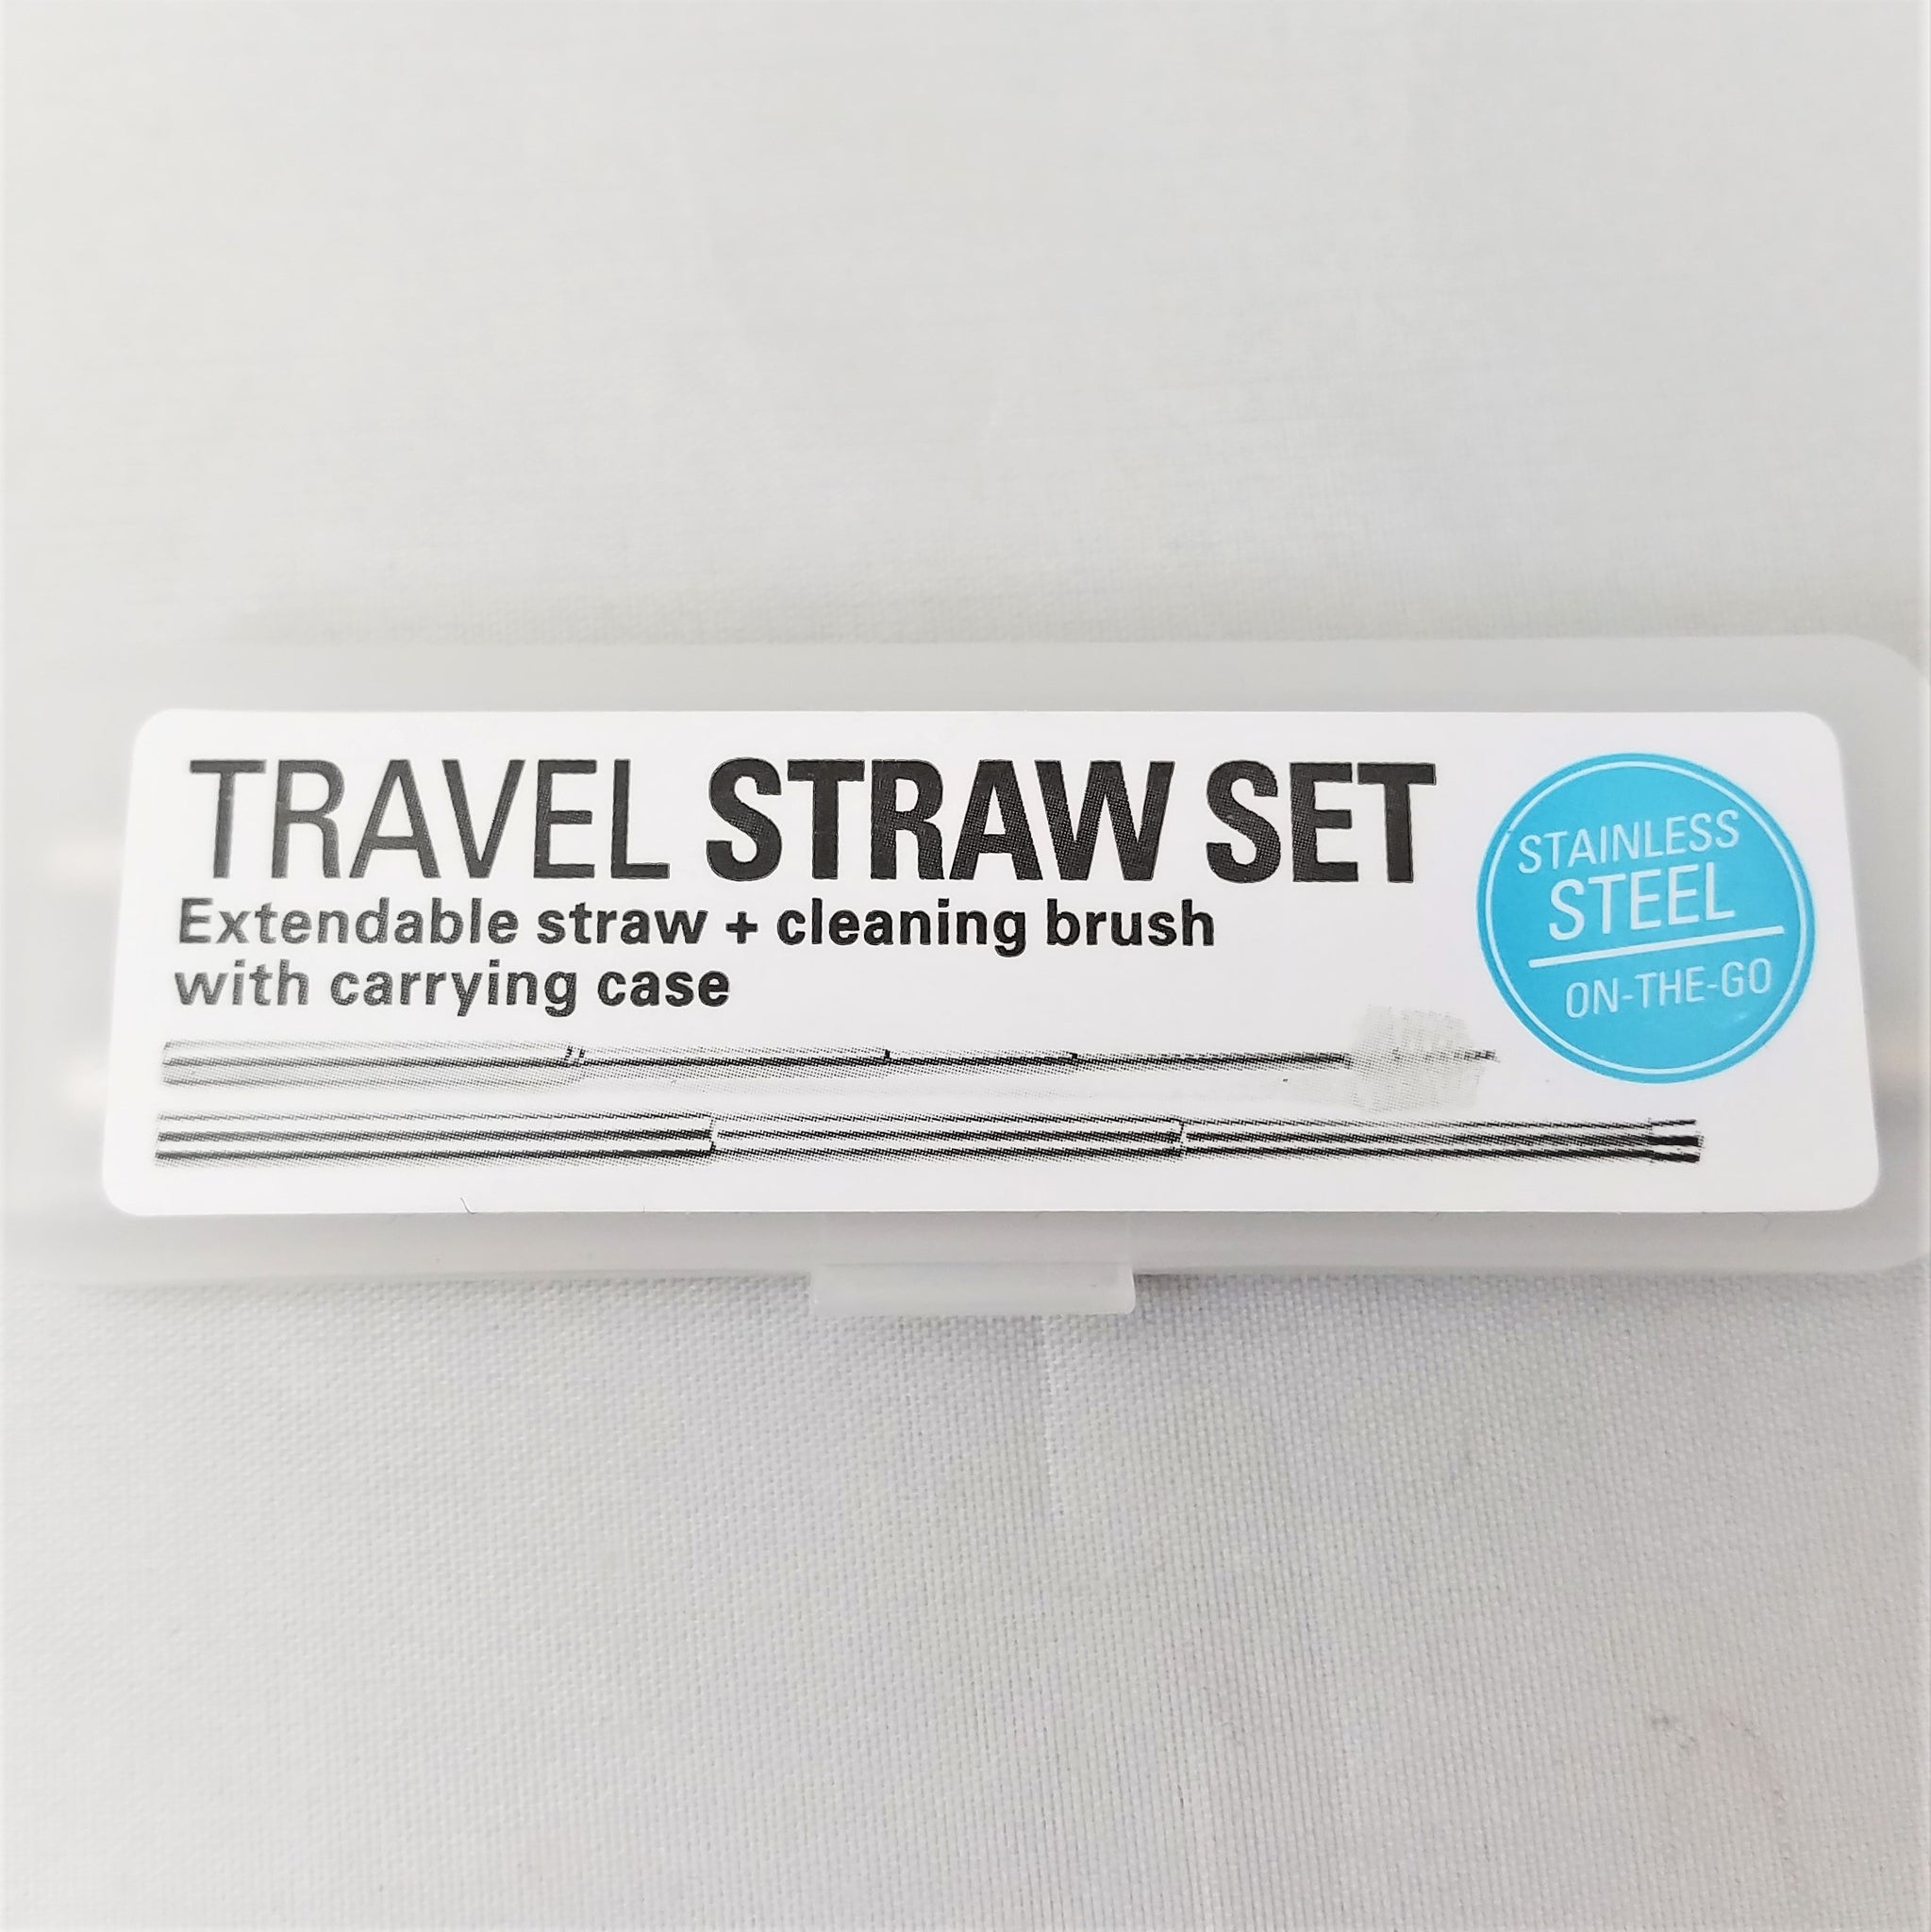 Everything You Need to Know About Traveling With Metal Straws